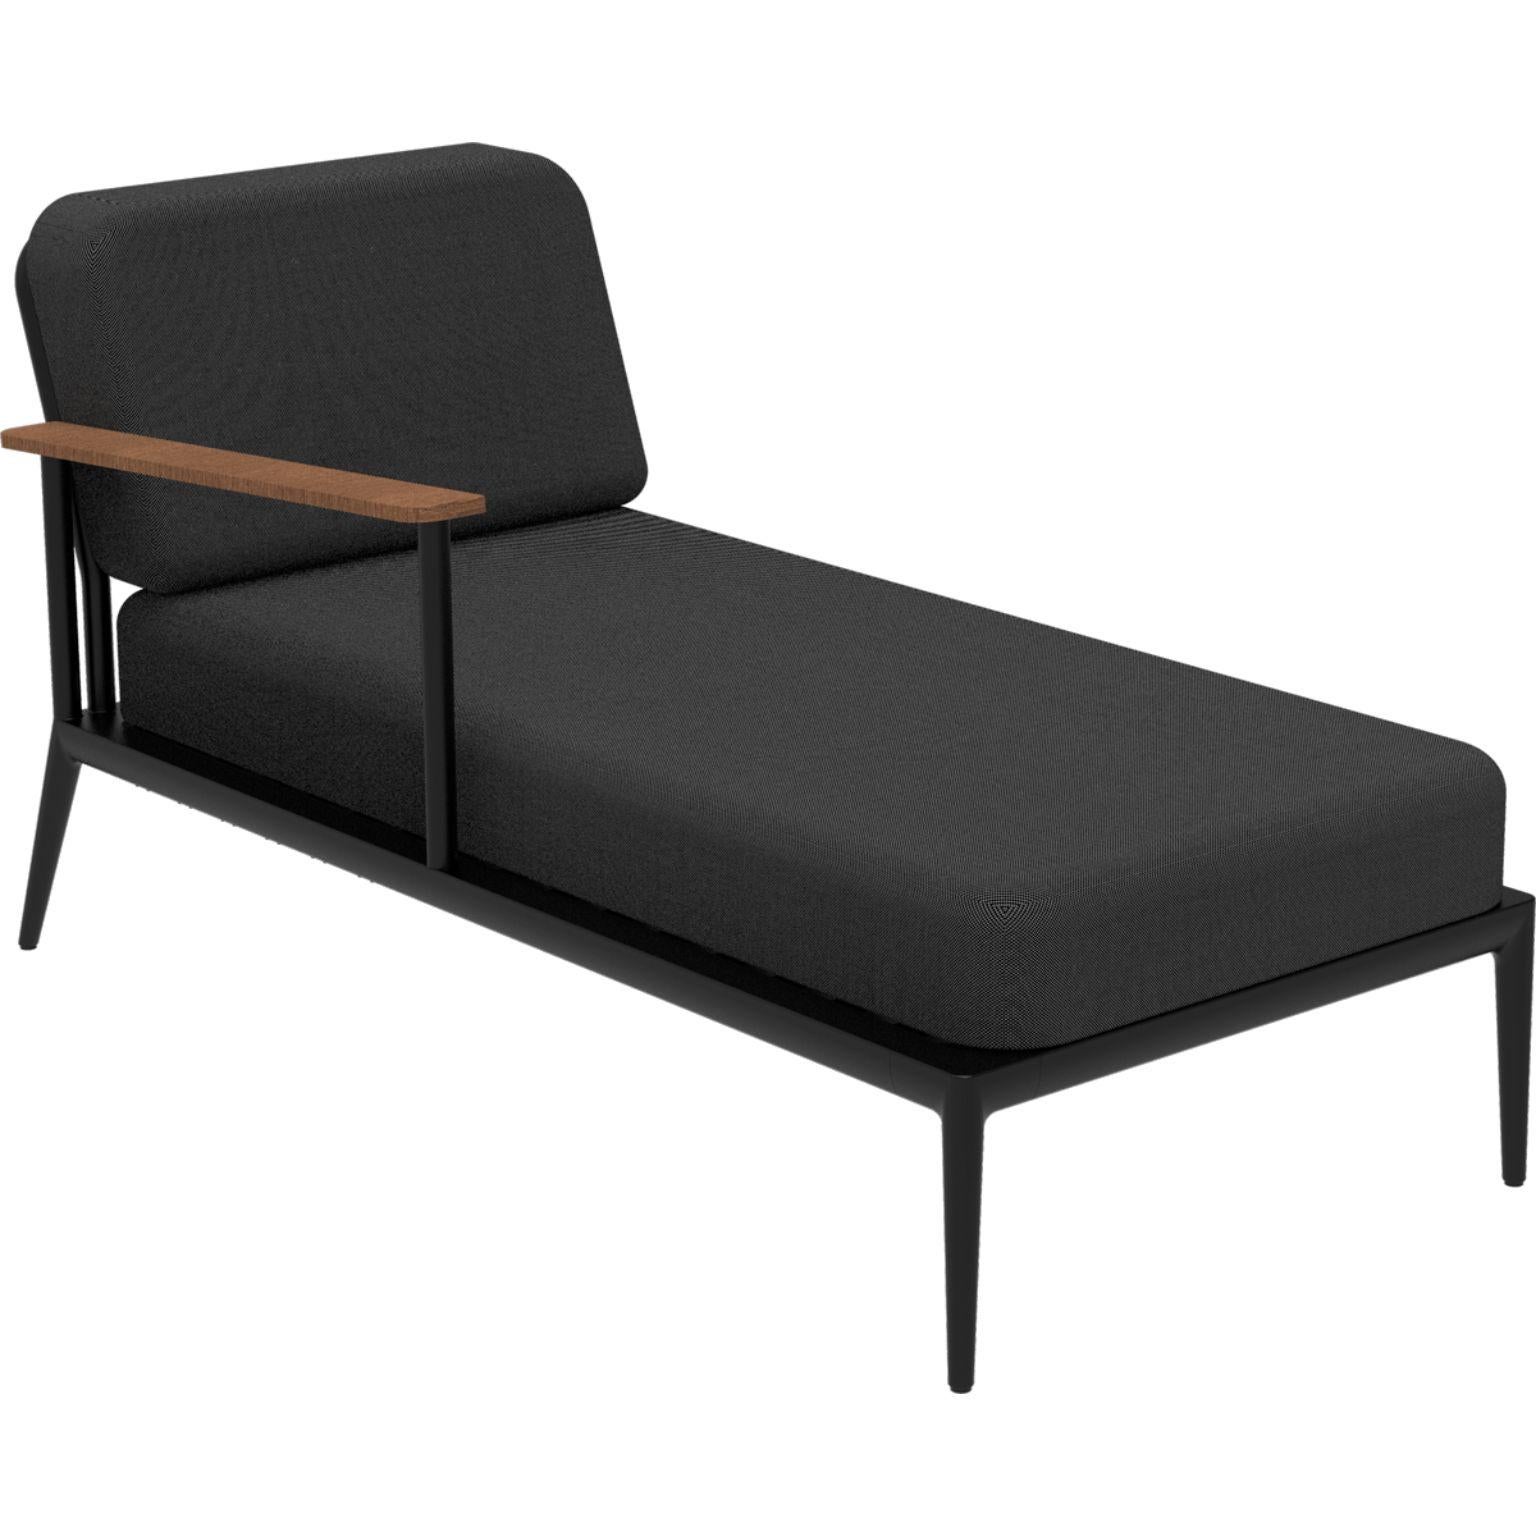 Nature black right chaise longue by MOWEE
Dimensions: D155 x W76 x H81 cm (seat height 42 cm).
Material: Aluminum, upholstery and Iroko Wood.
Weight: 28 kg.
Also available in different colors and finishes.

An unmistakable collection for its